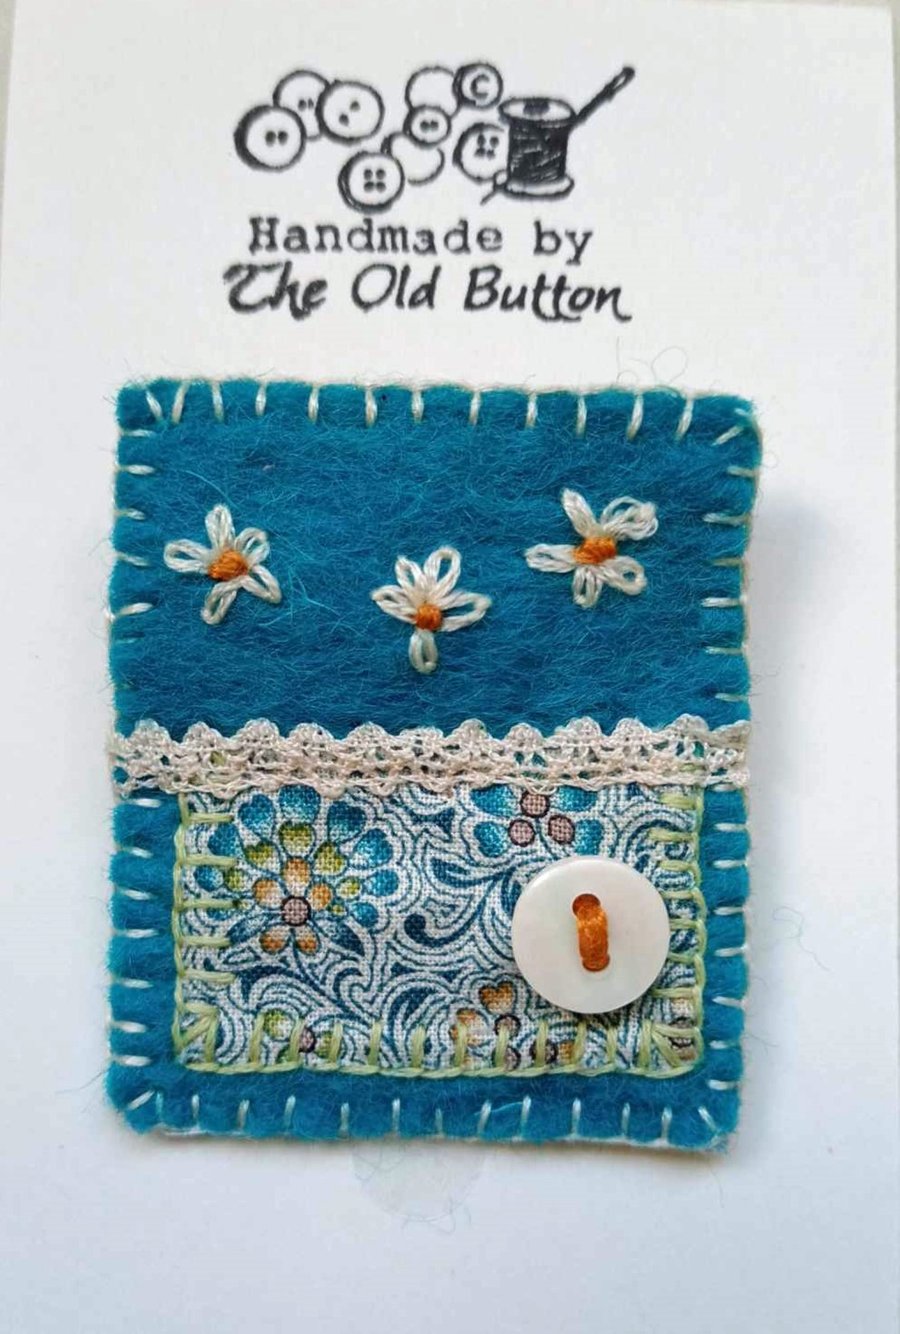 Brooch, wool felt hand sewn with applique and embroidery